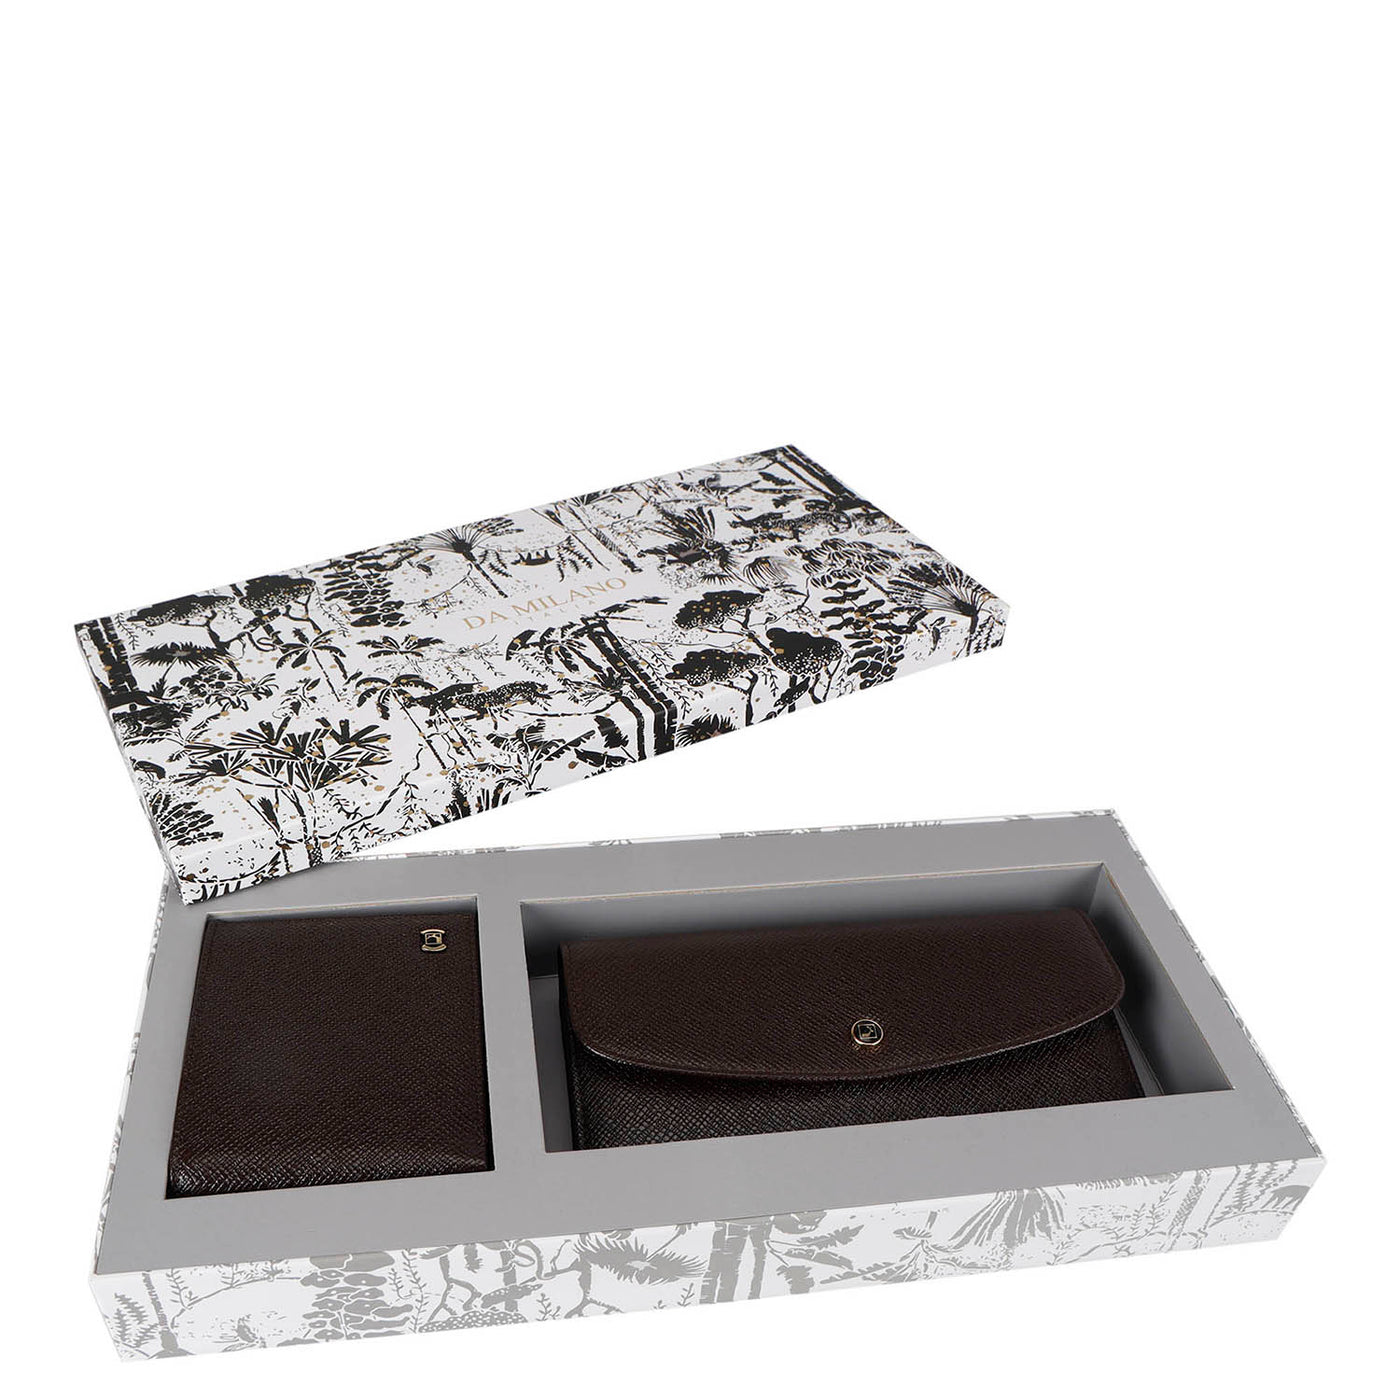 Chocolate Franzy Leather Mens & Ladies Wallet Gift Set